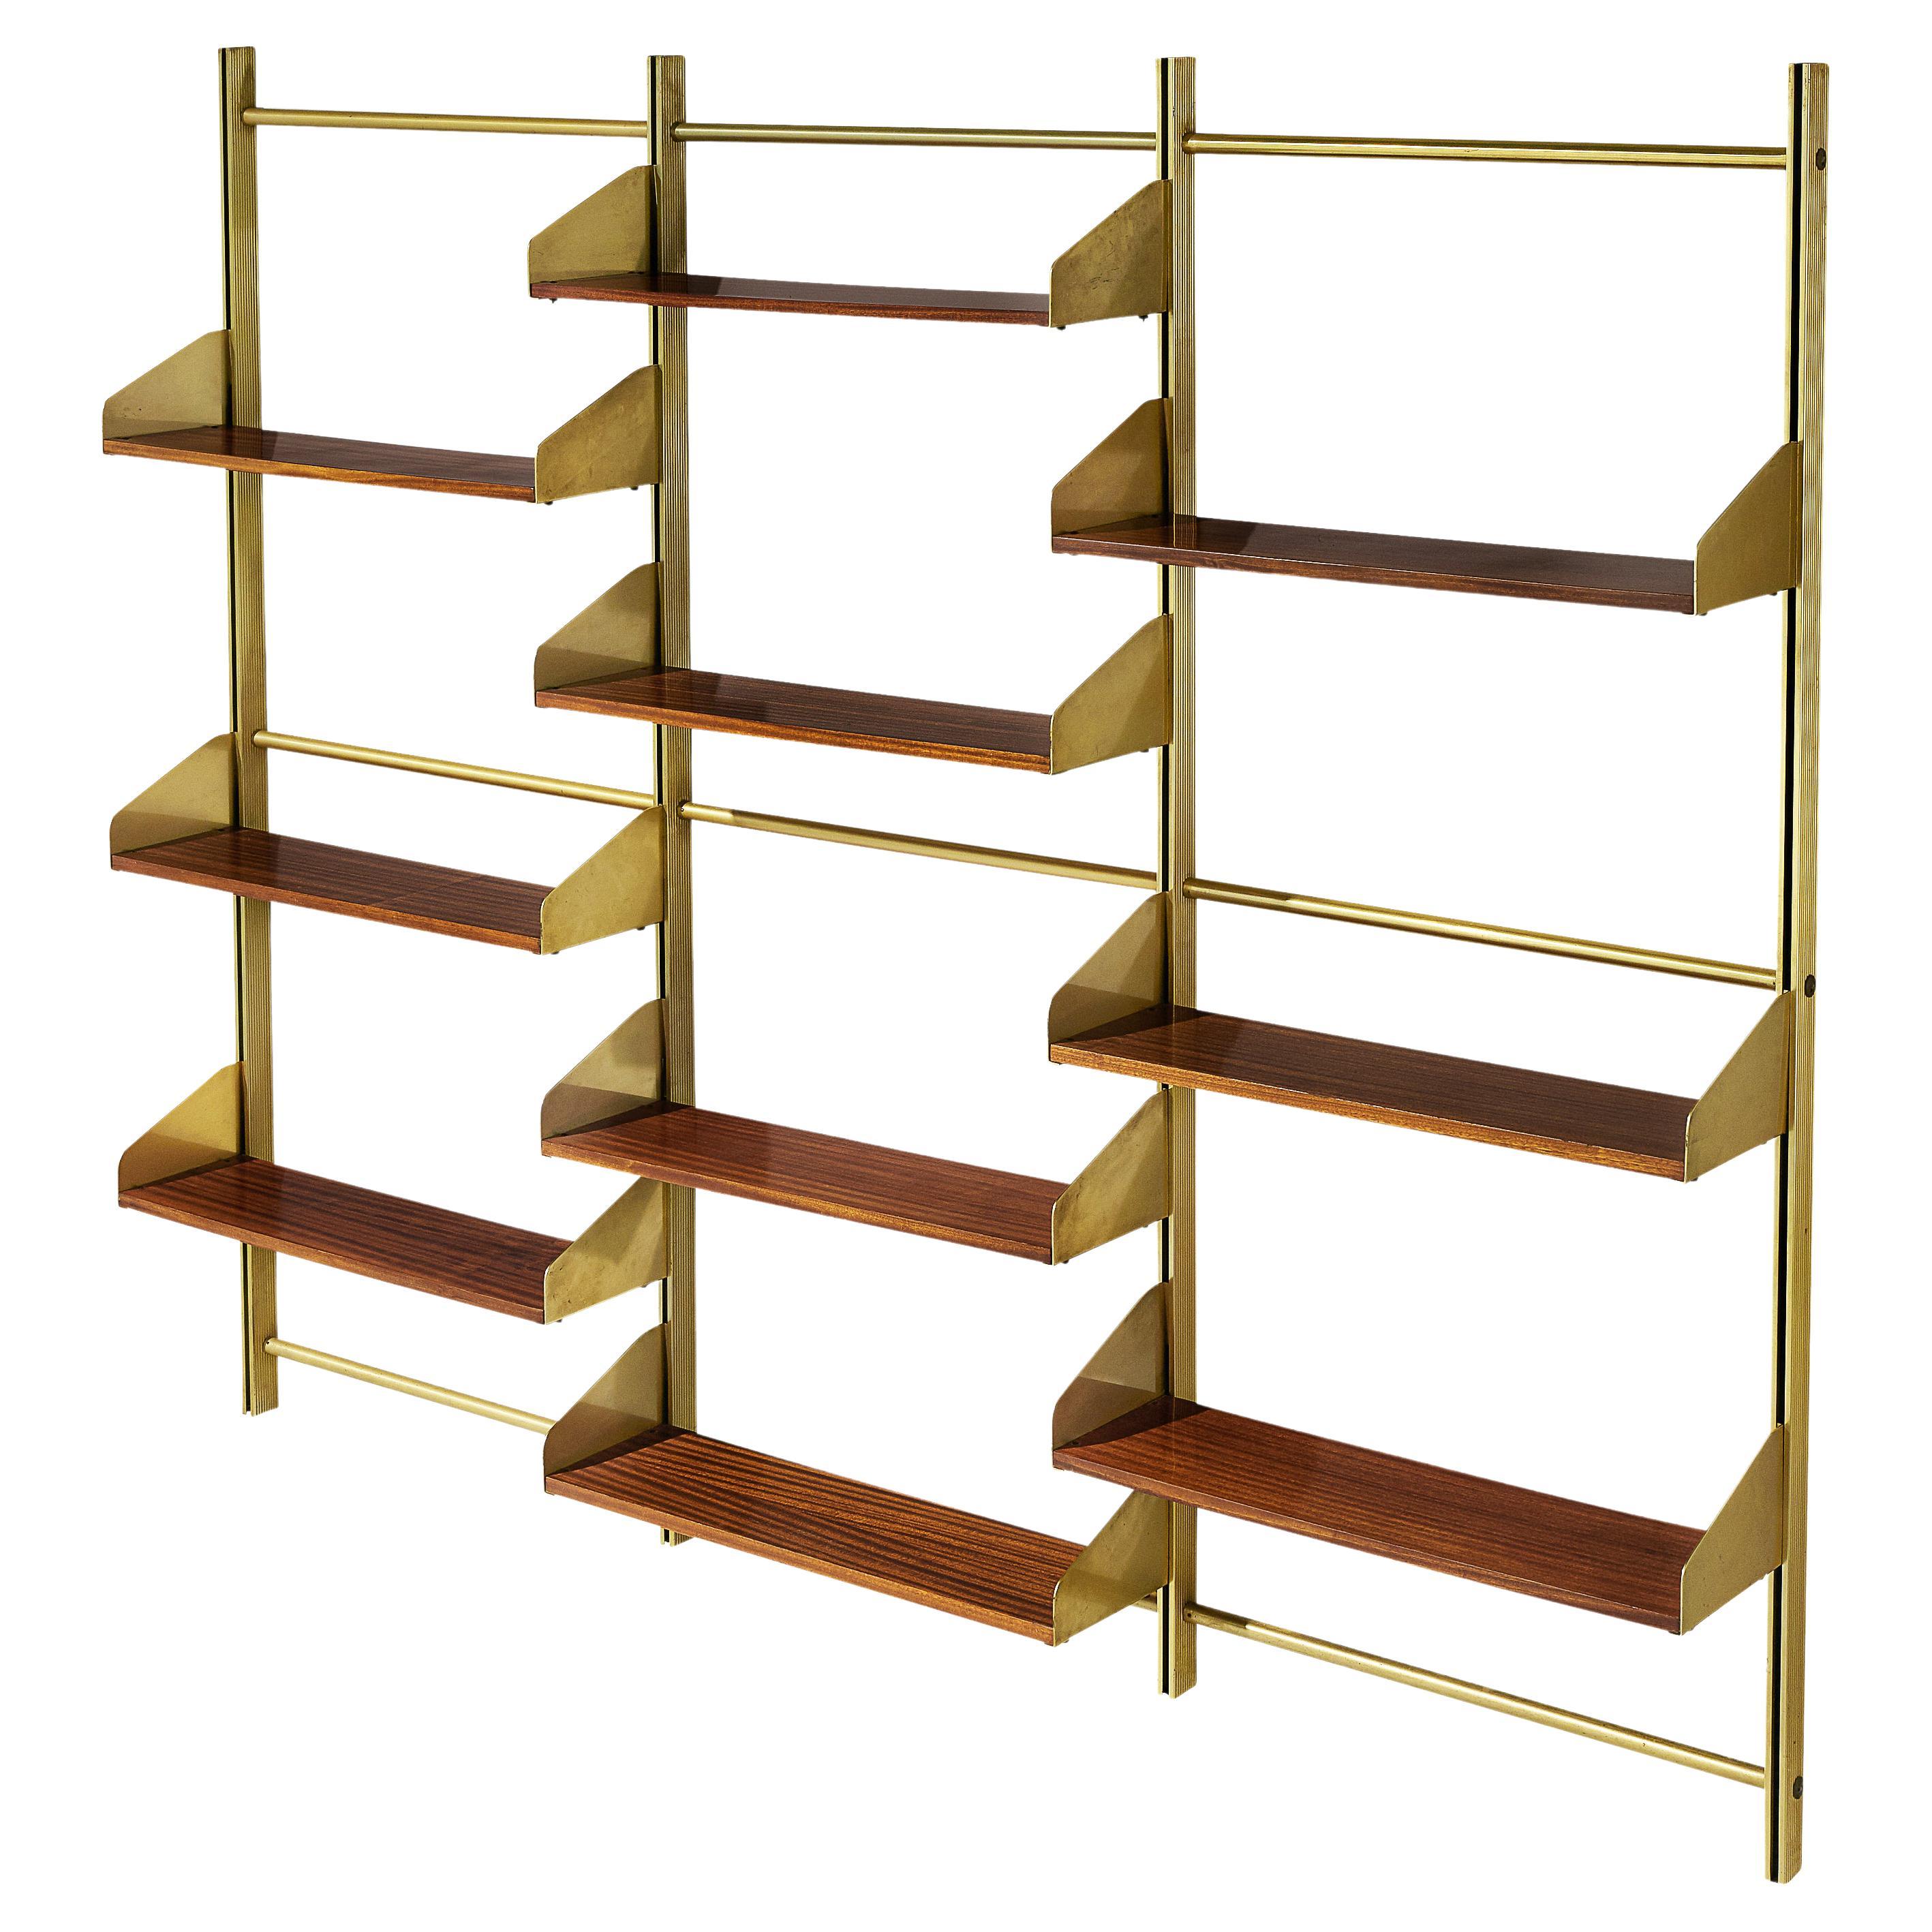 Feal Wall Unit in Teak and Brass